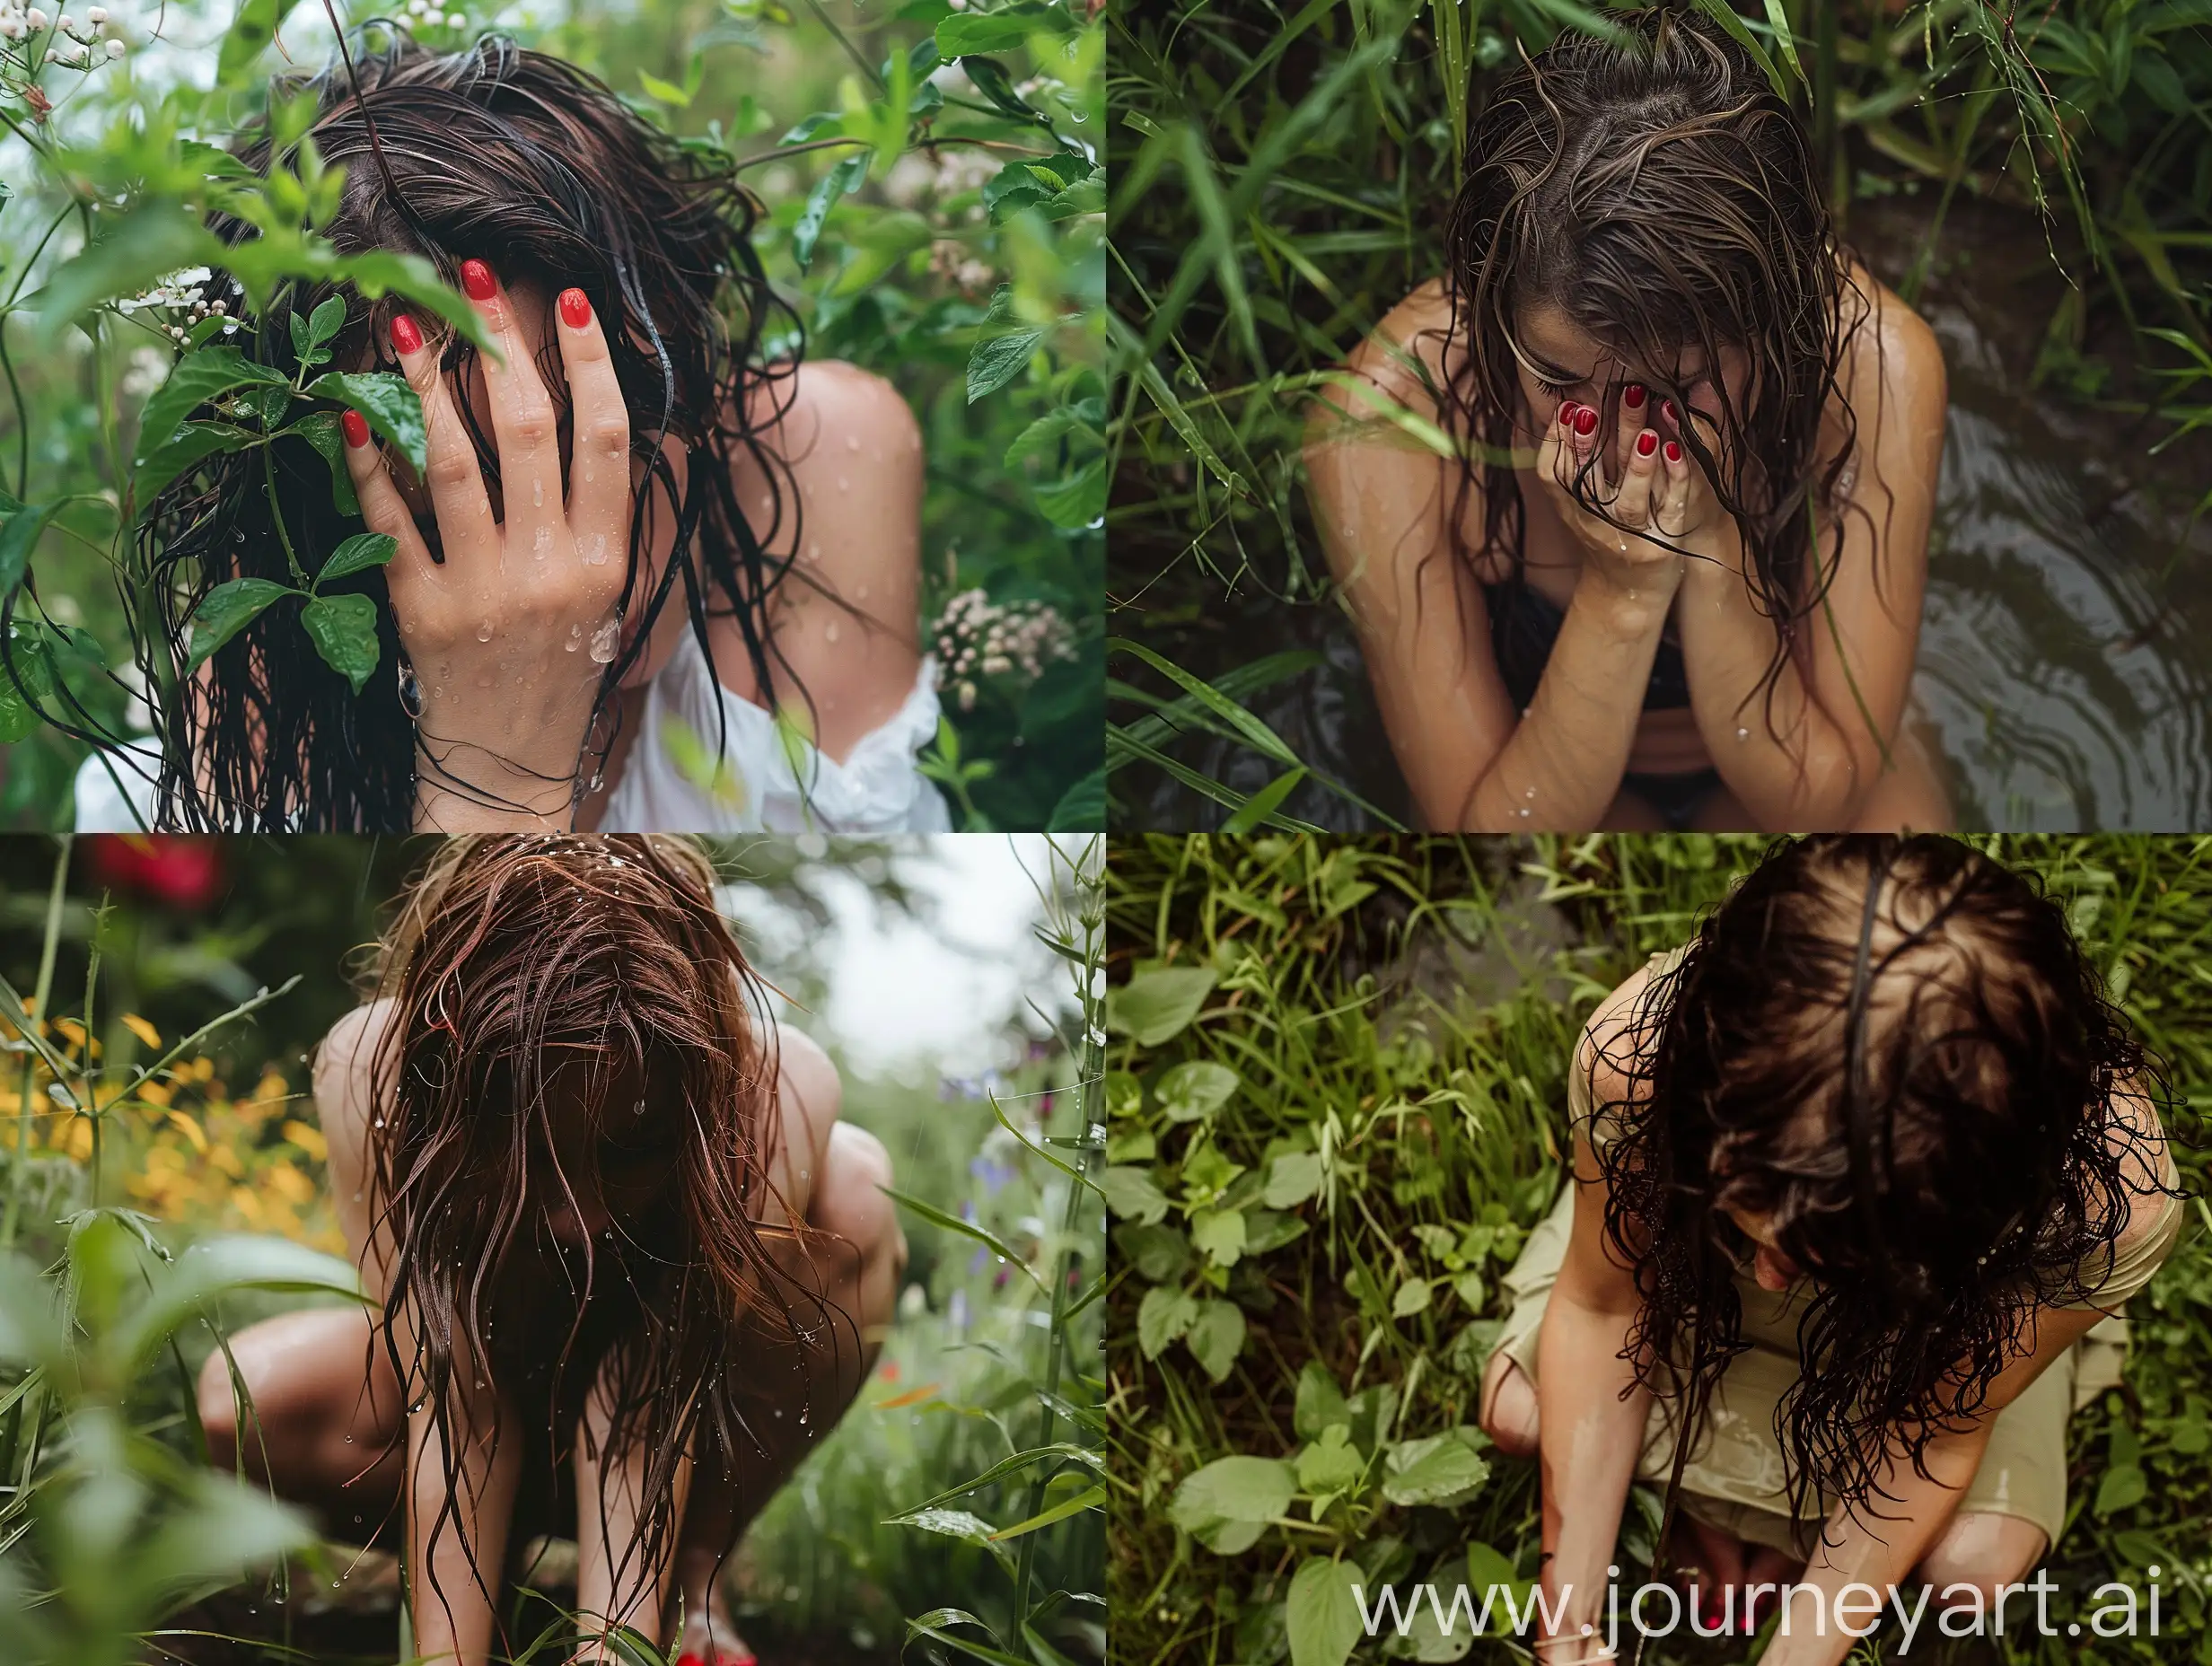 Woman-with-Wet-Hair-and-Red-Toe-Nails-in-Garden